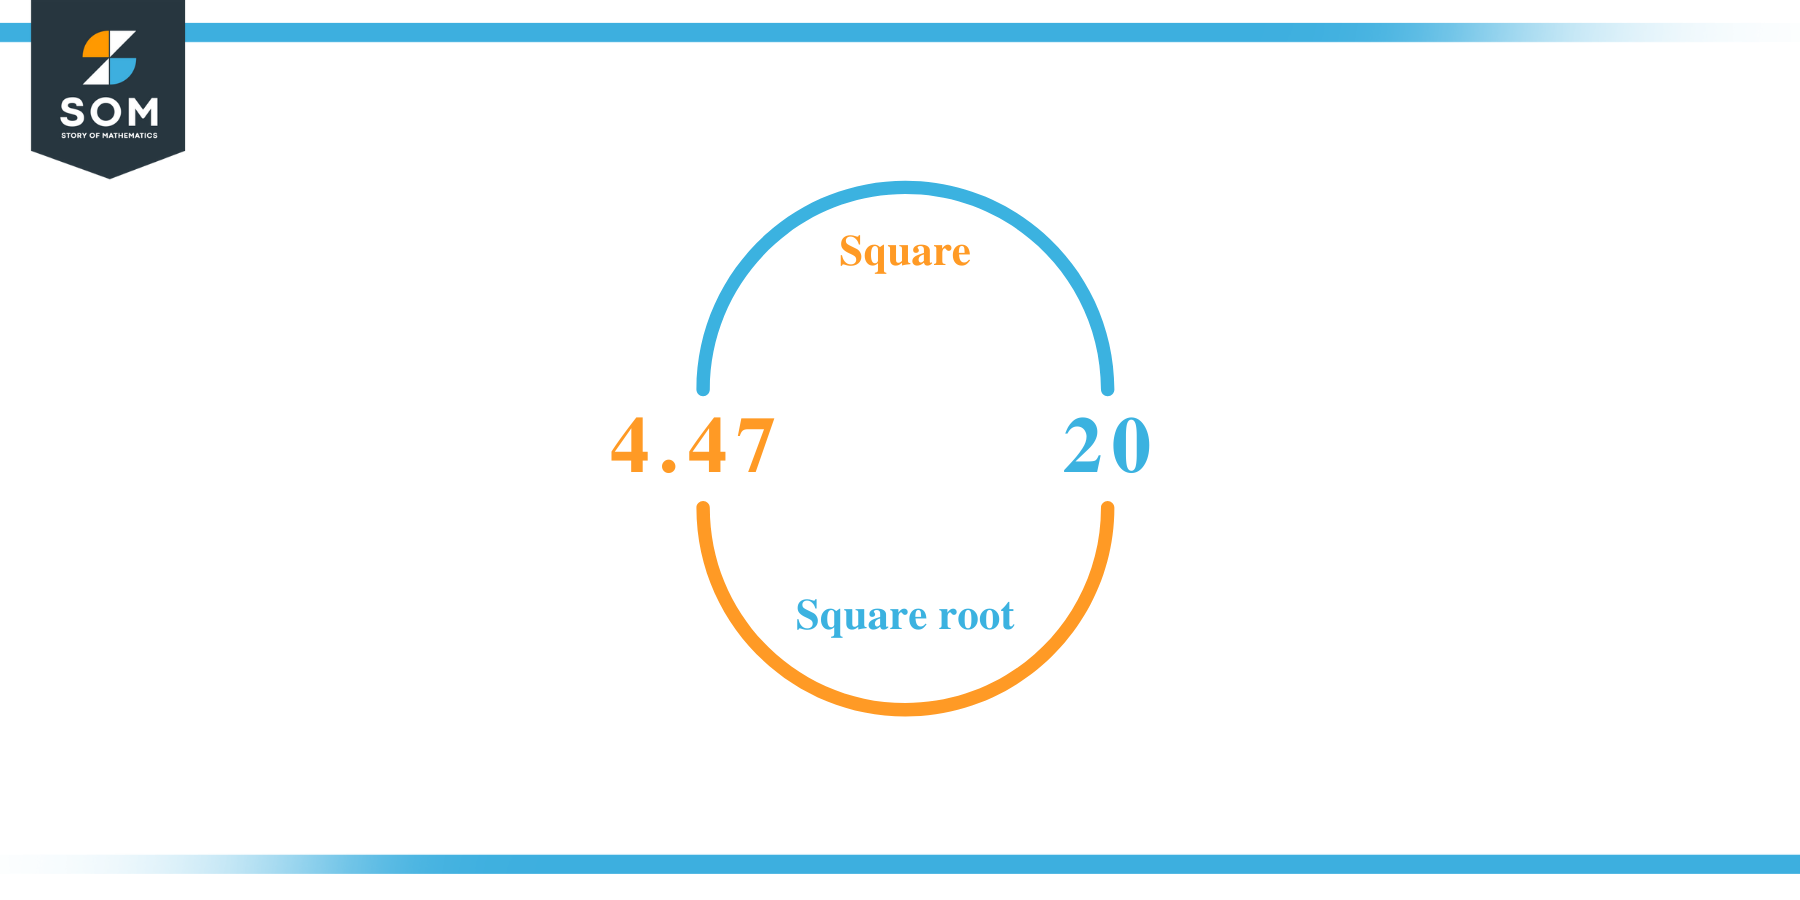 Square root of 20 Approximation Method